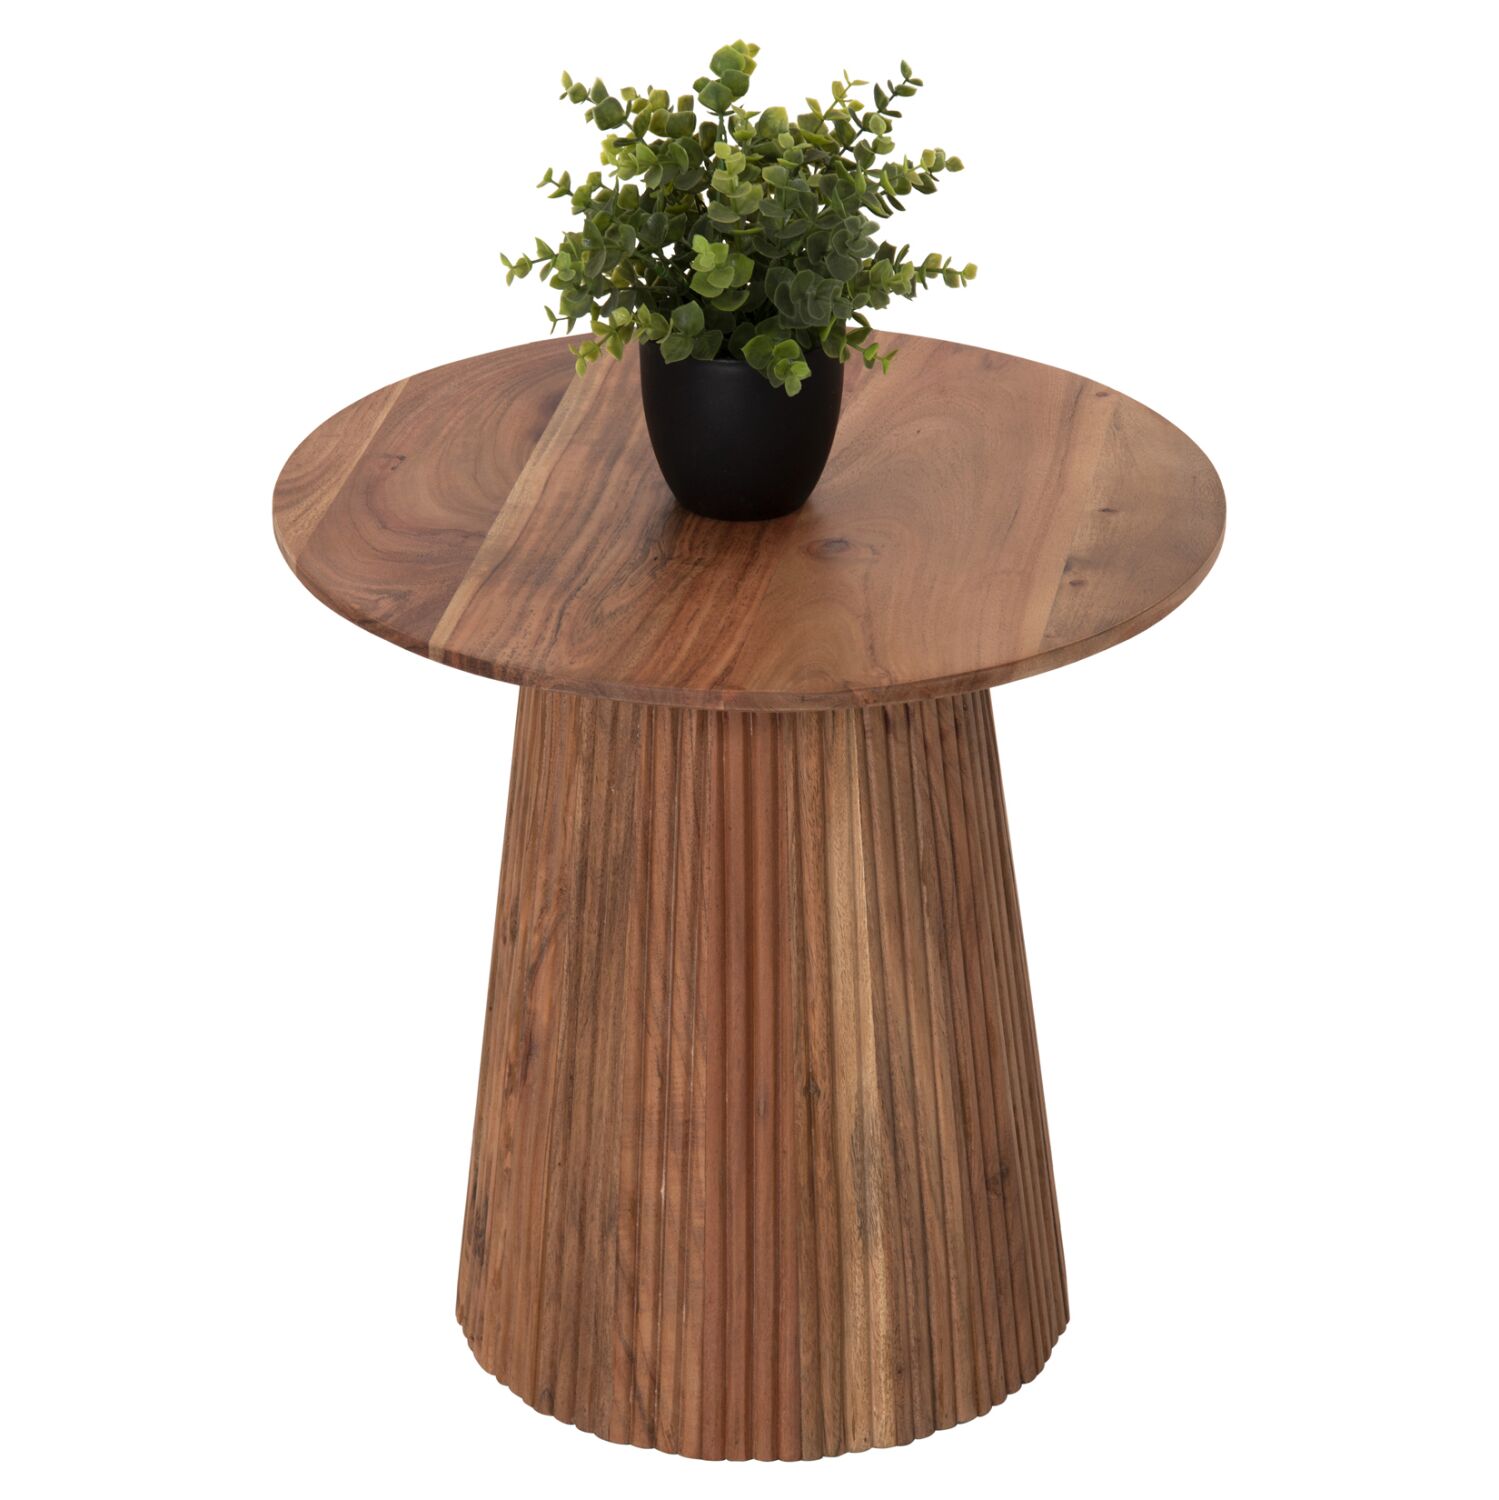 SIDE TABLE ROUND GROOT HM9698 SOLID ACACIA-NATURAL COLOR Φ45x44Hcm.